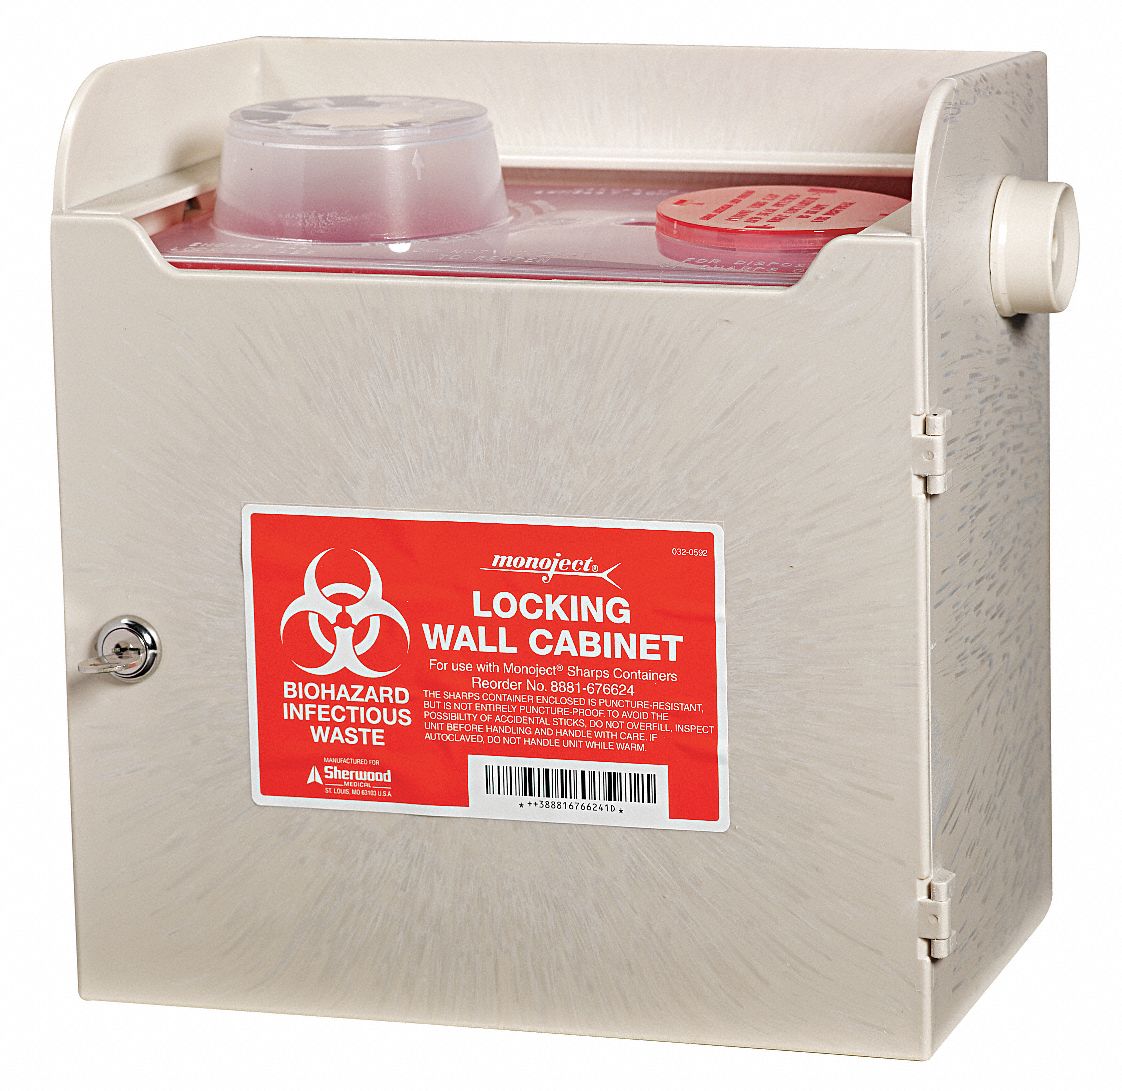 Sharps Container Accessories - Grainger Industrial Supply